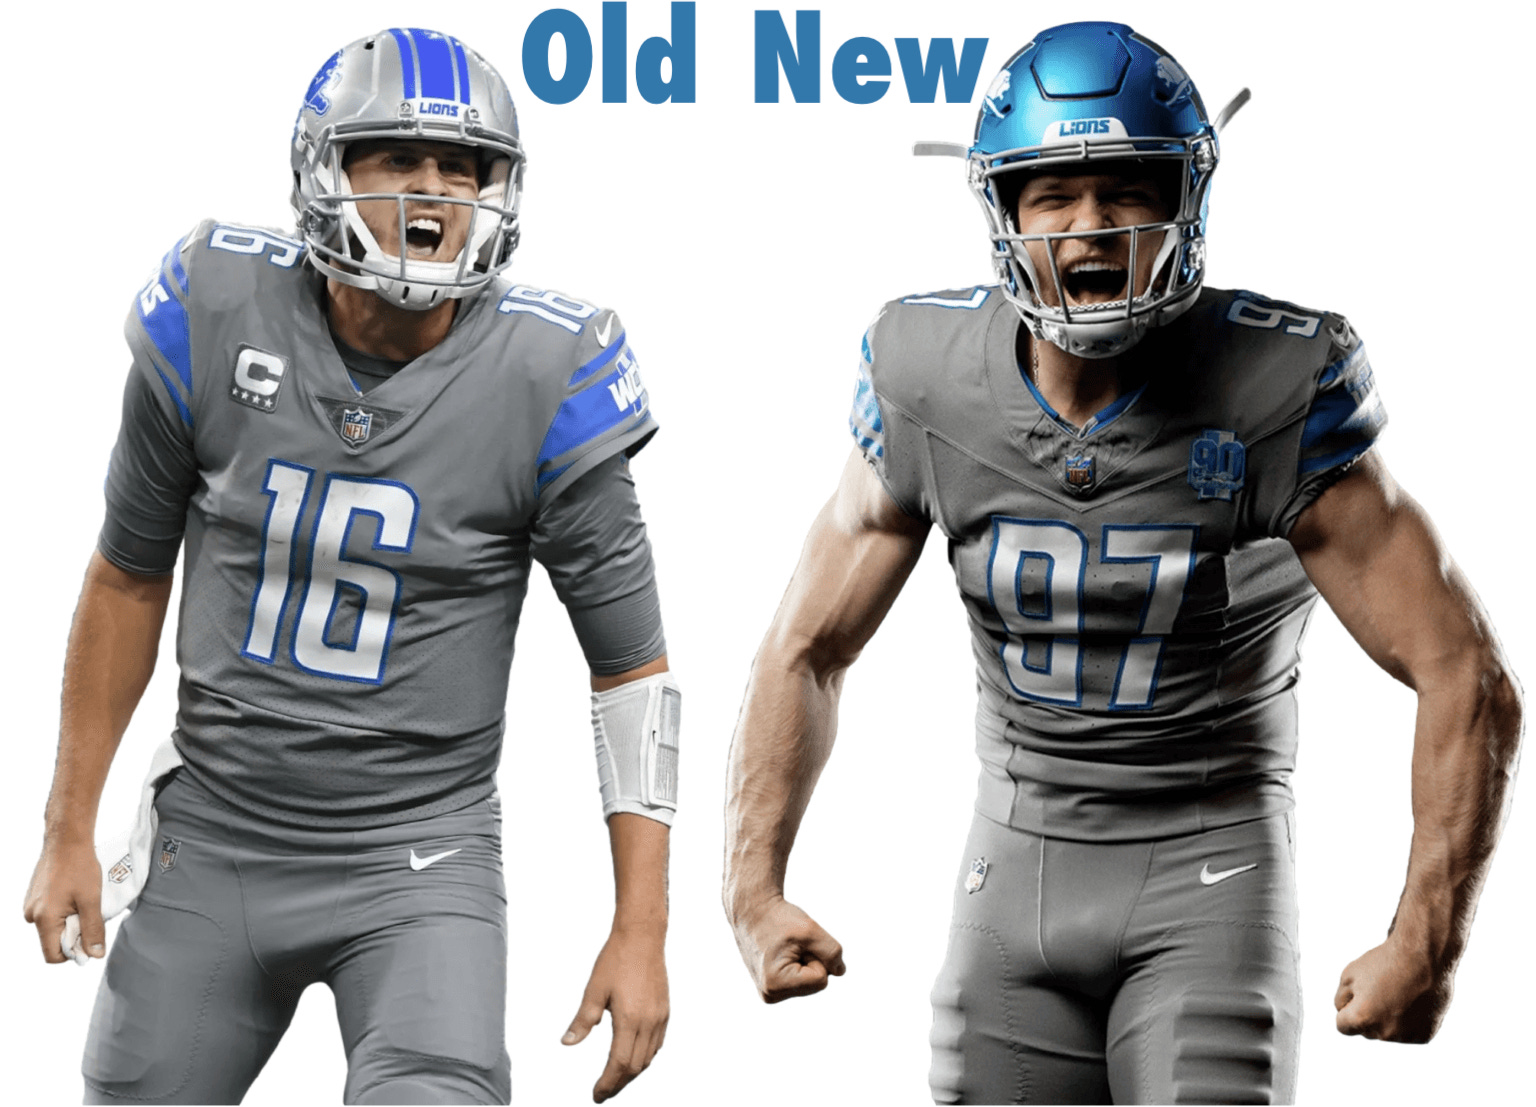 Here's a comparison between the new uniforms and the old ones